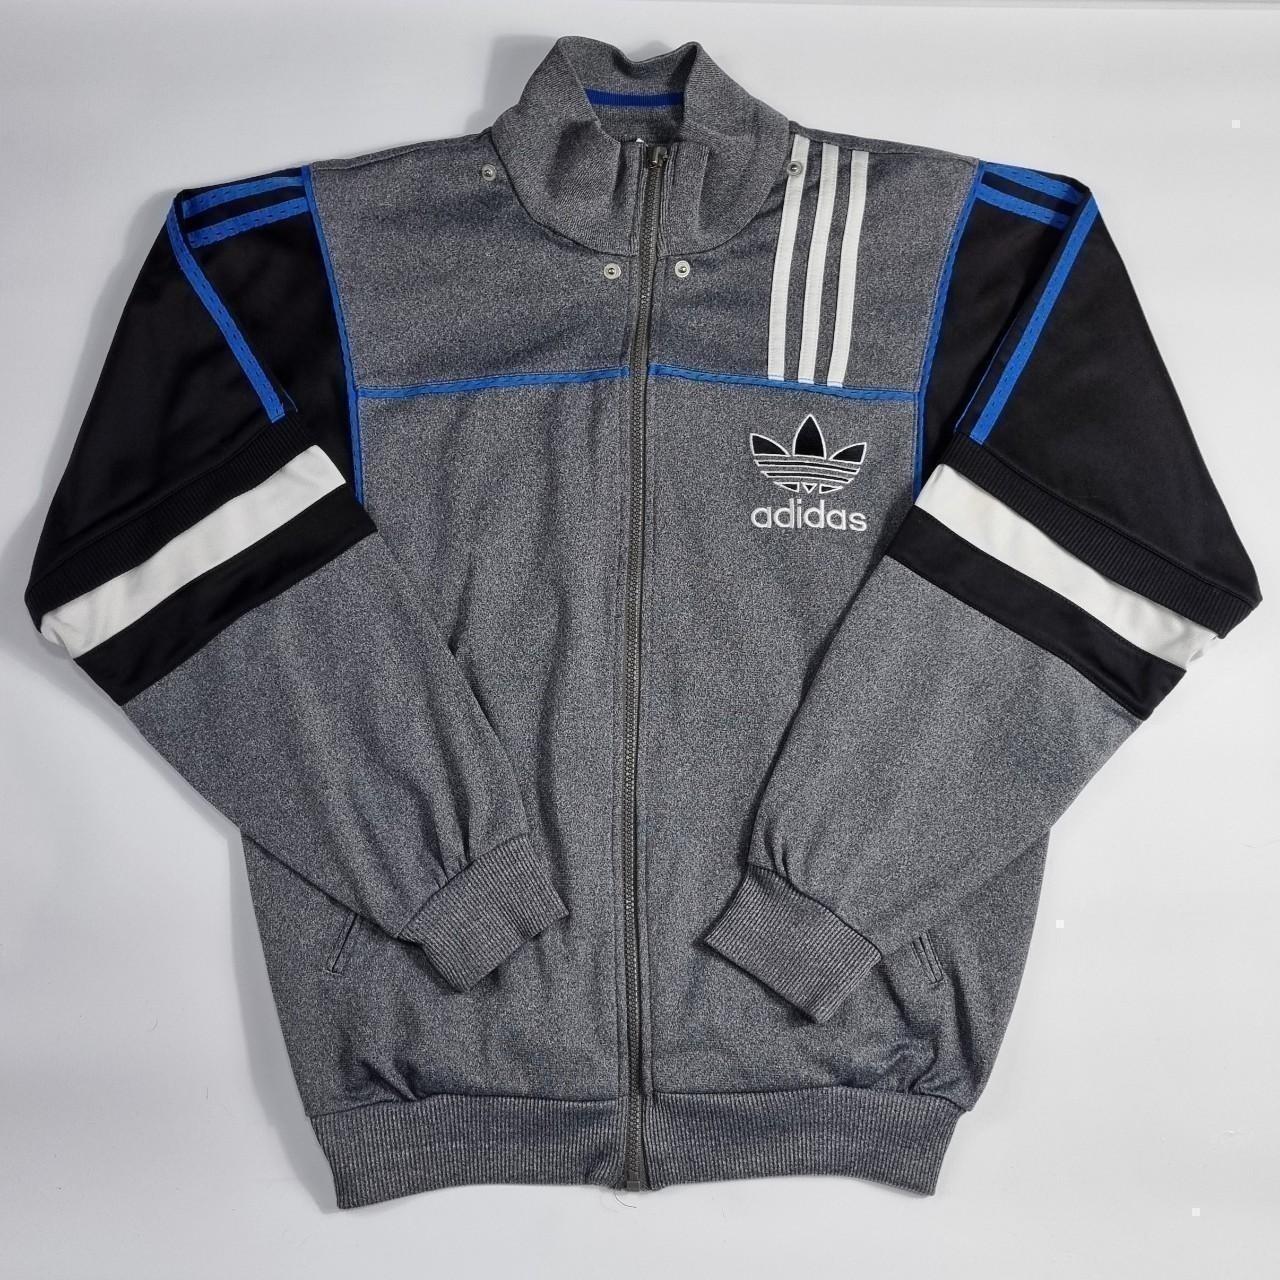 ADIDAS SPELLOUT TRACK JACKET Size - Small (Model is... - Depop